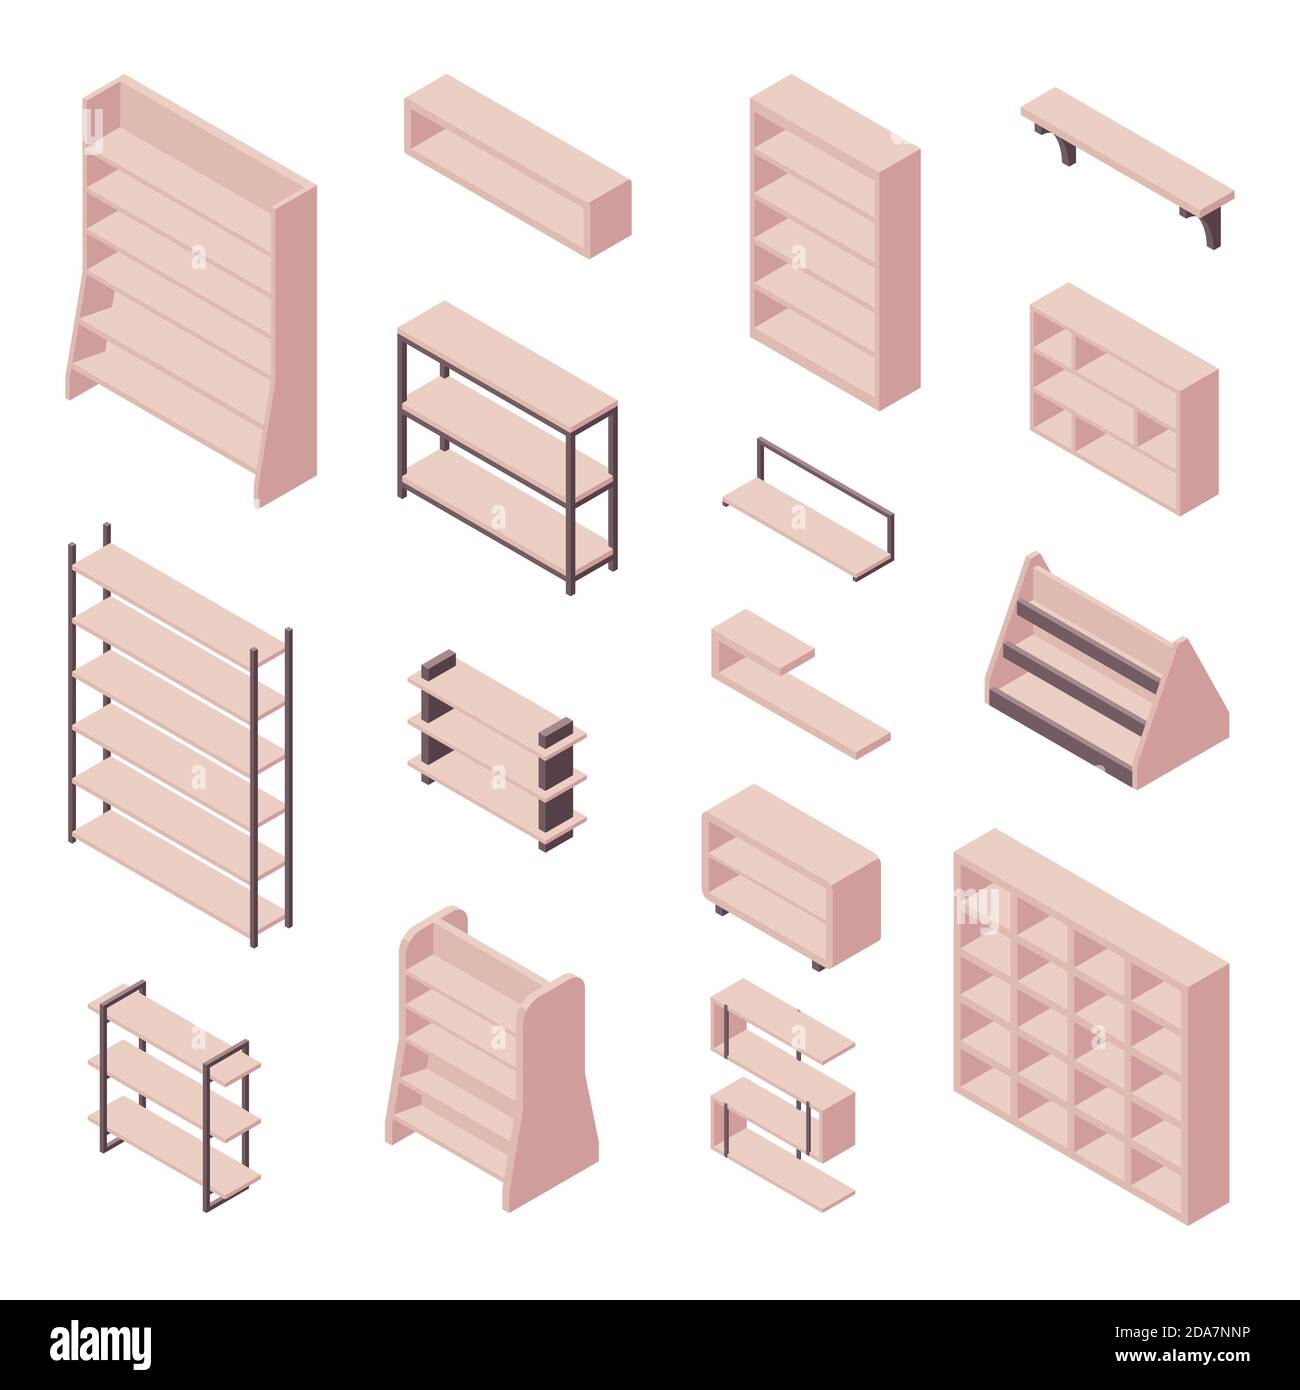 Bookshelf isometric - set of various cases and shelves for books for home and store interior design. Stock Vector